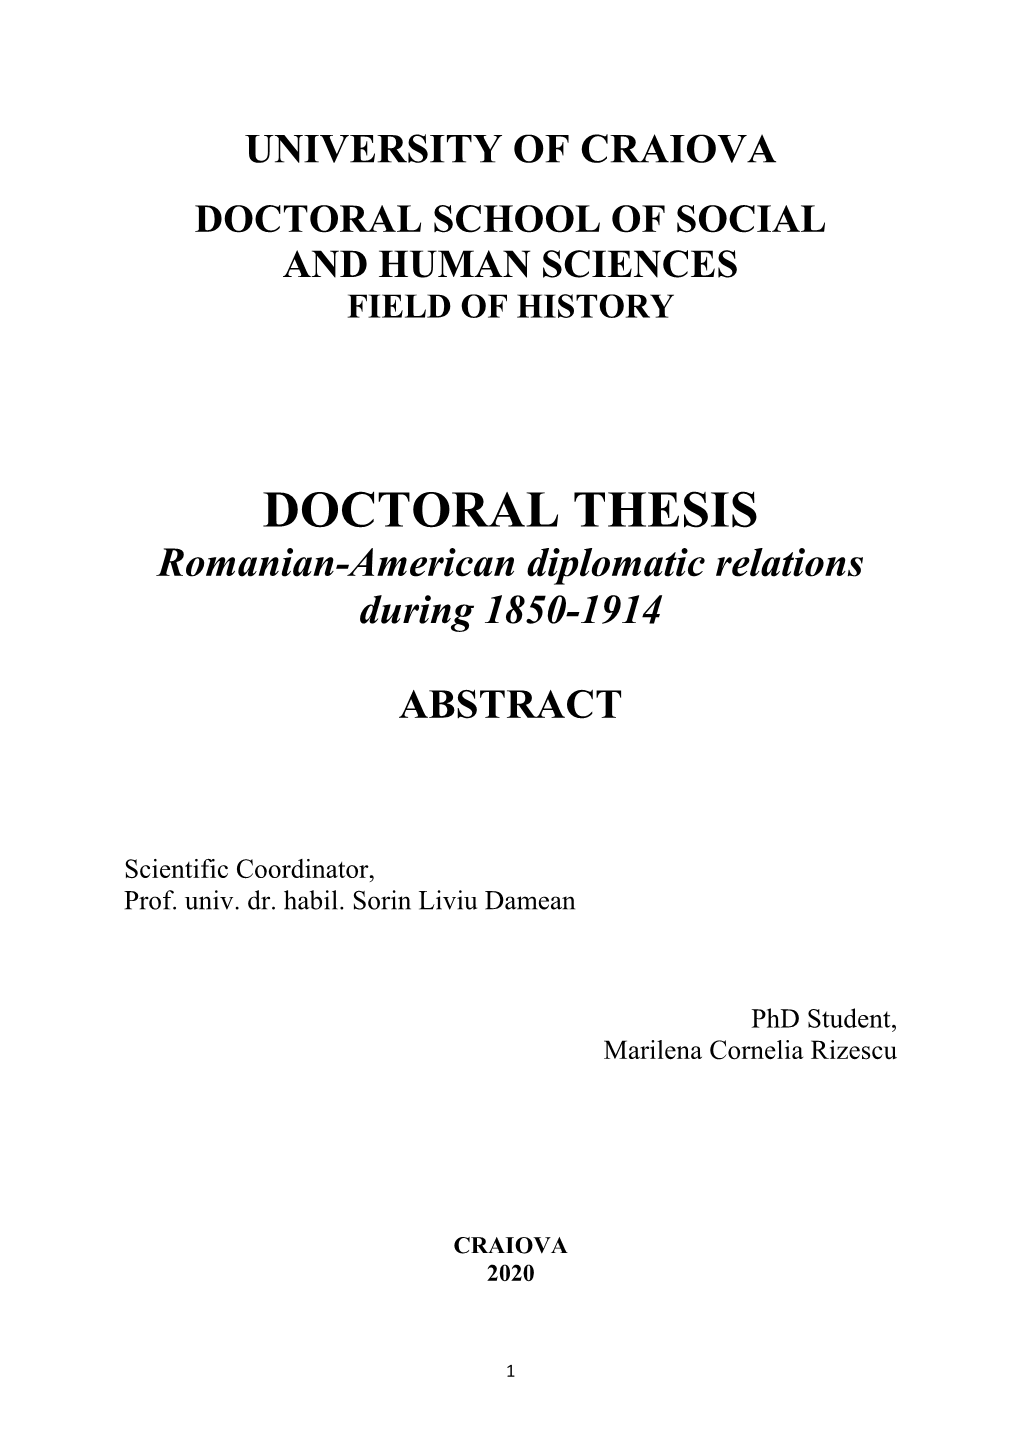 DOCTORAL THESIS Romanian-American Diplomatic Relations During 1850-1914